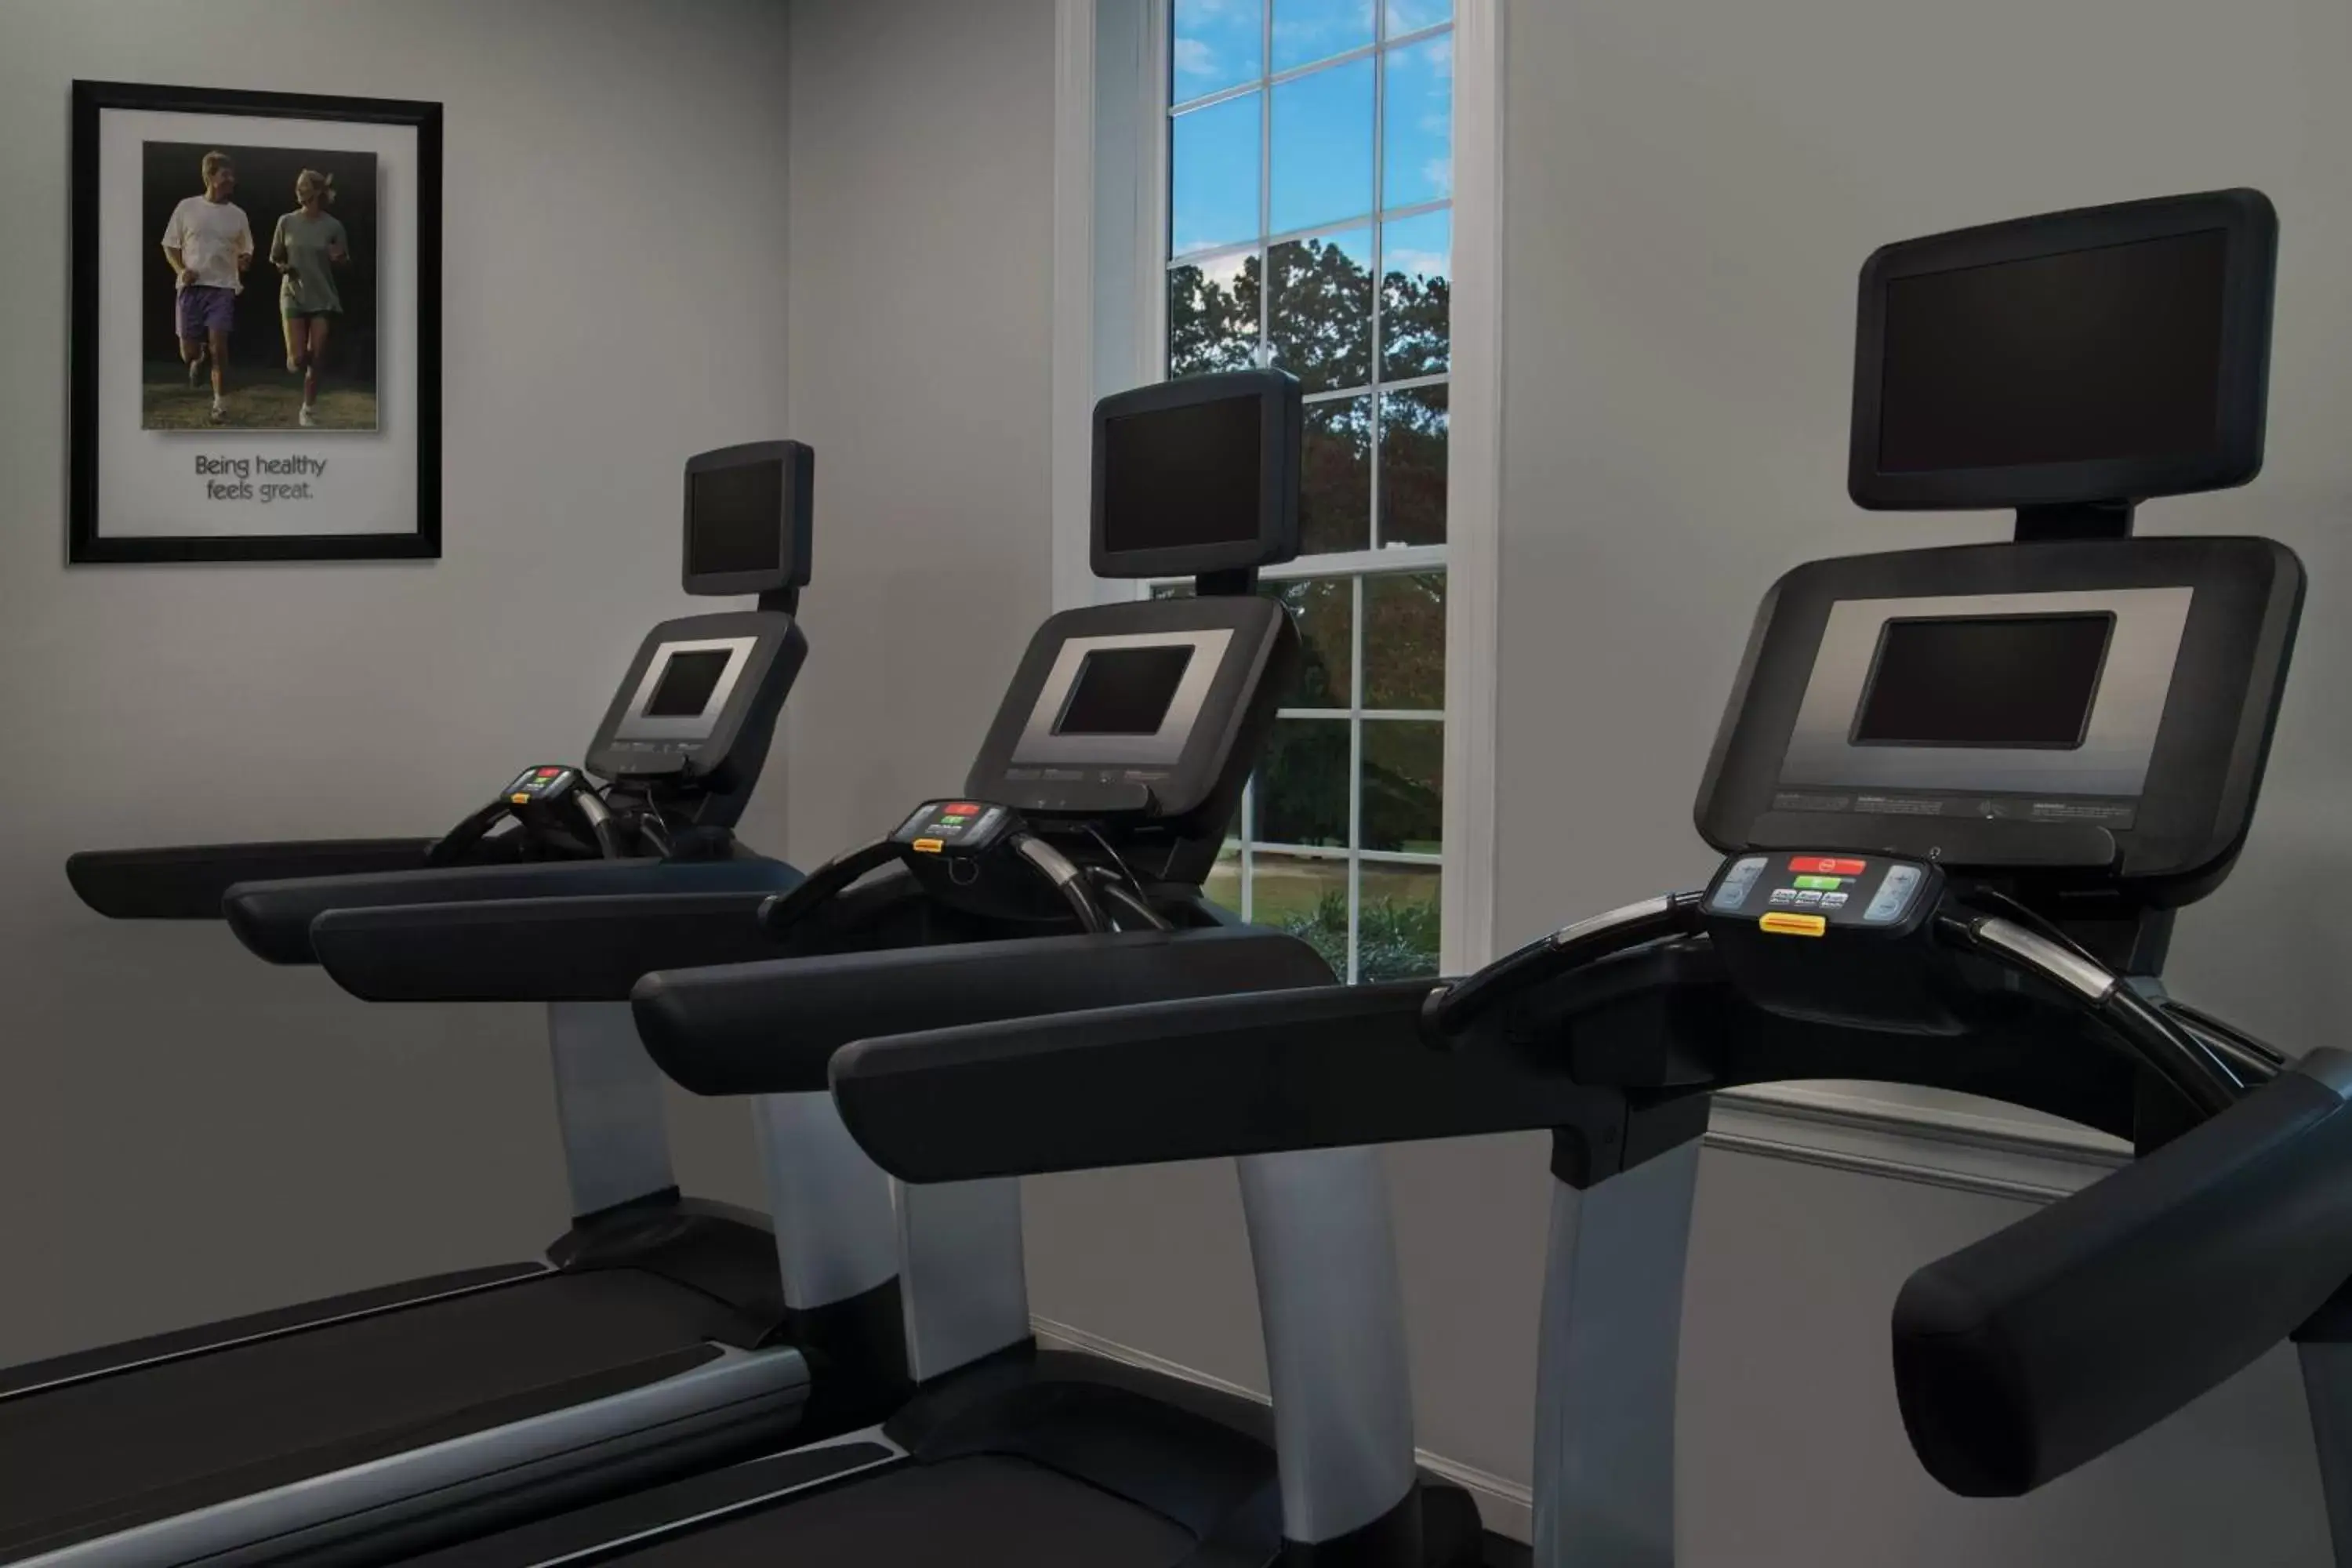 Fitness centre/facilities, Fitness Center/Facilities in Marriott's Manor Club at Ford's Colony